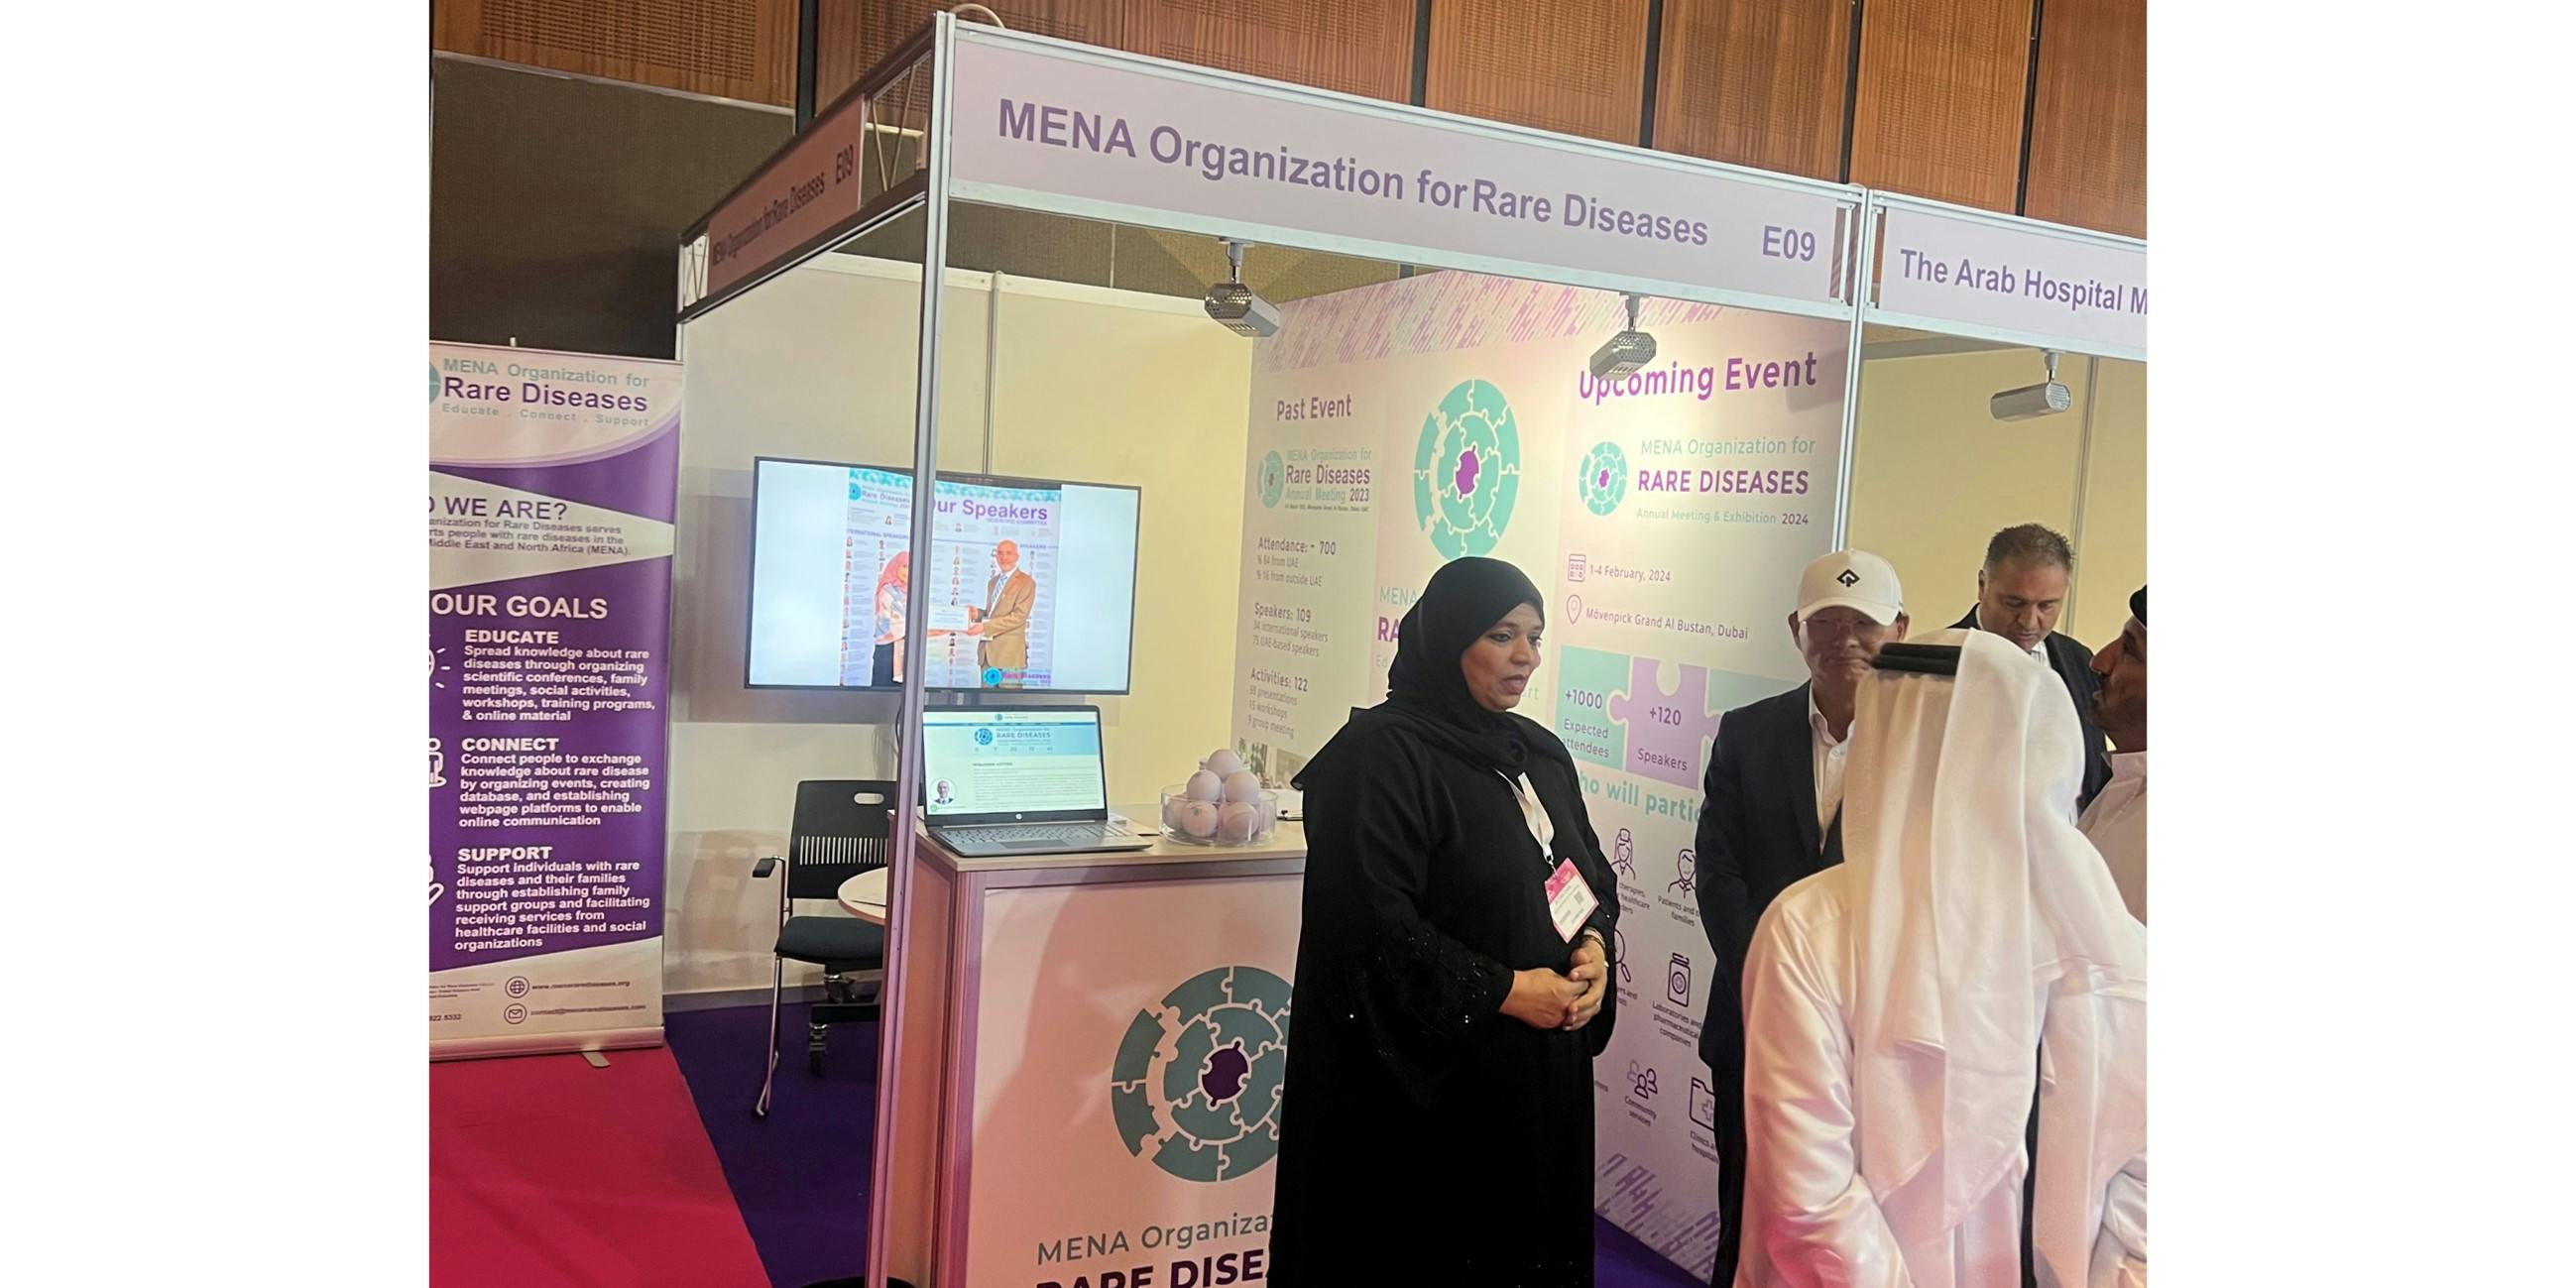 The participation of MENA Organization for Rare Diseases at the PrecisionMed Exhibition and Sumit